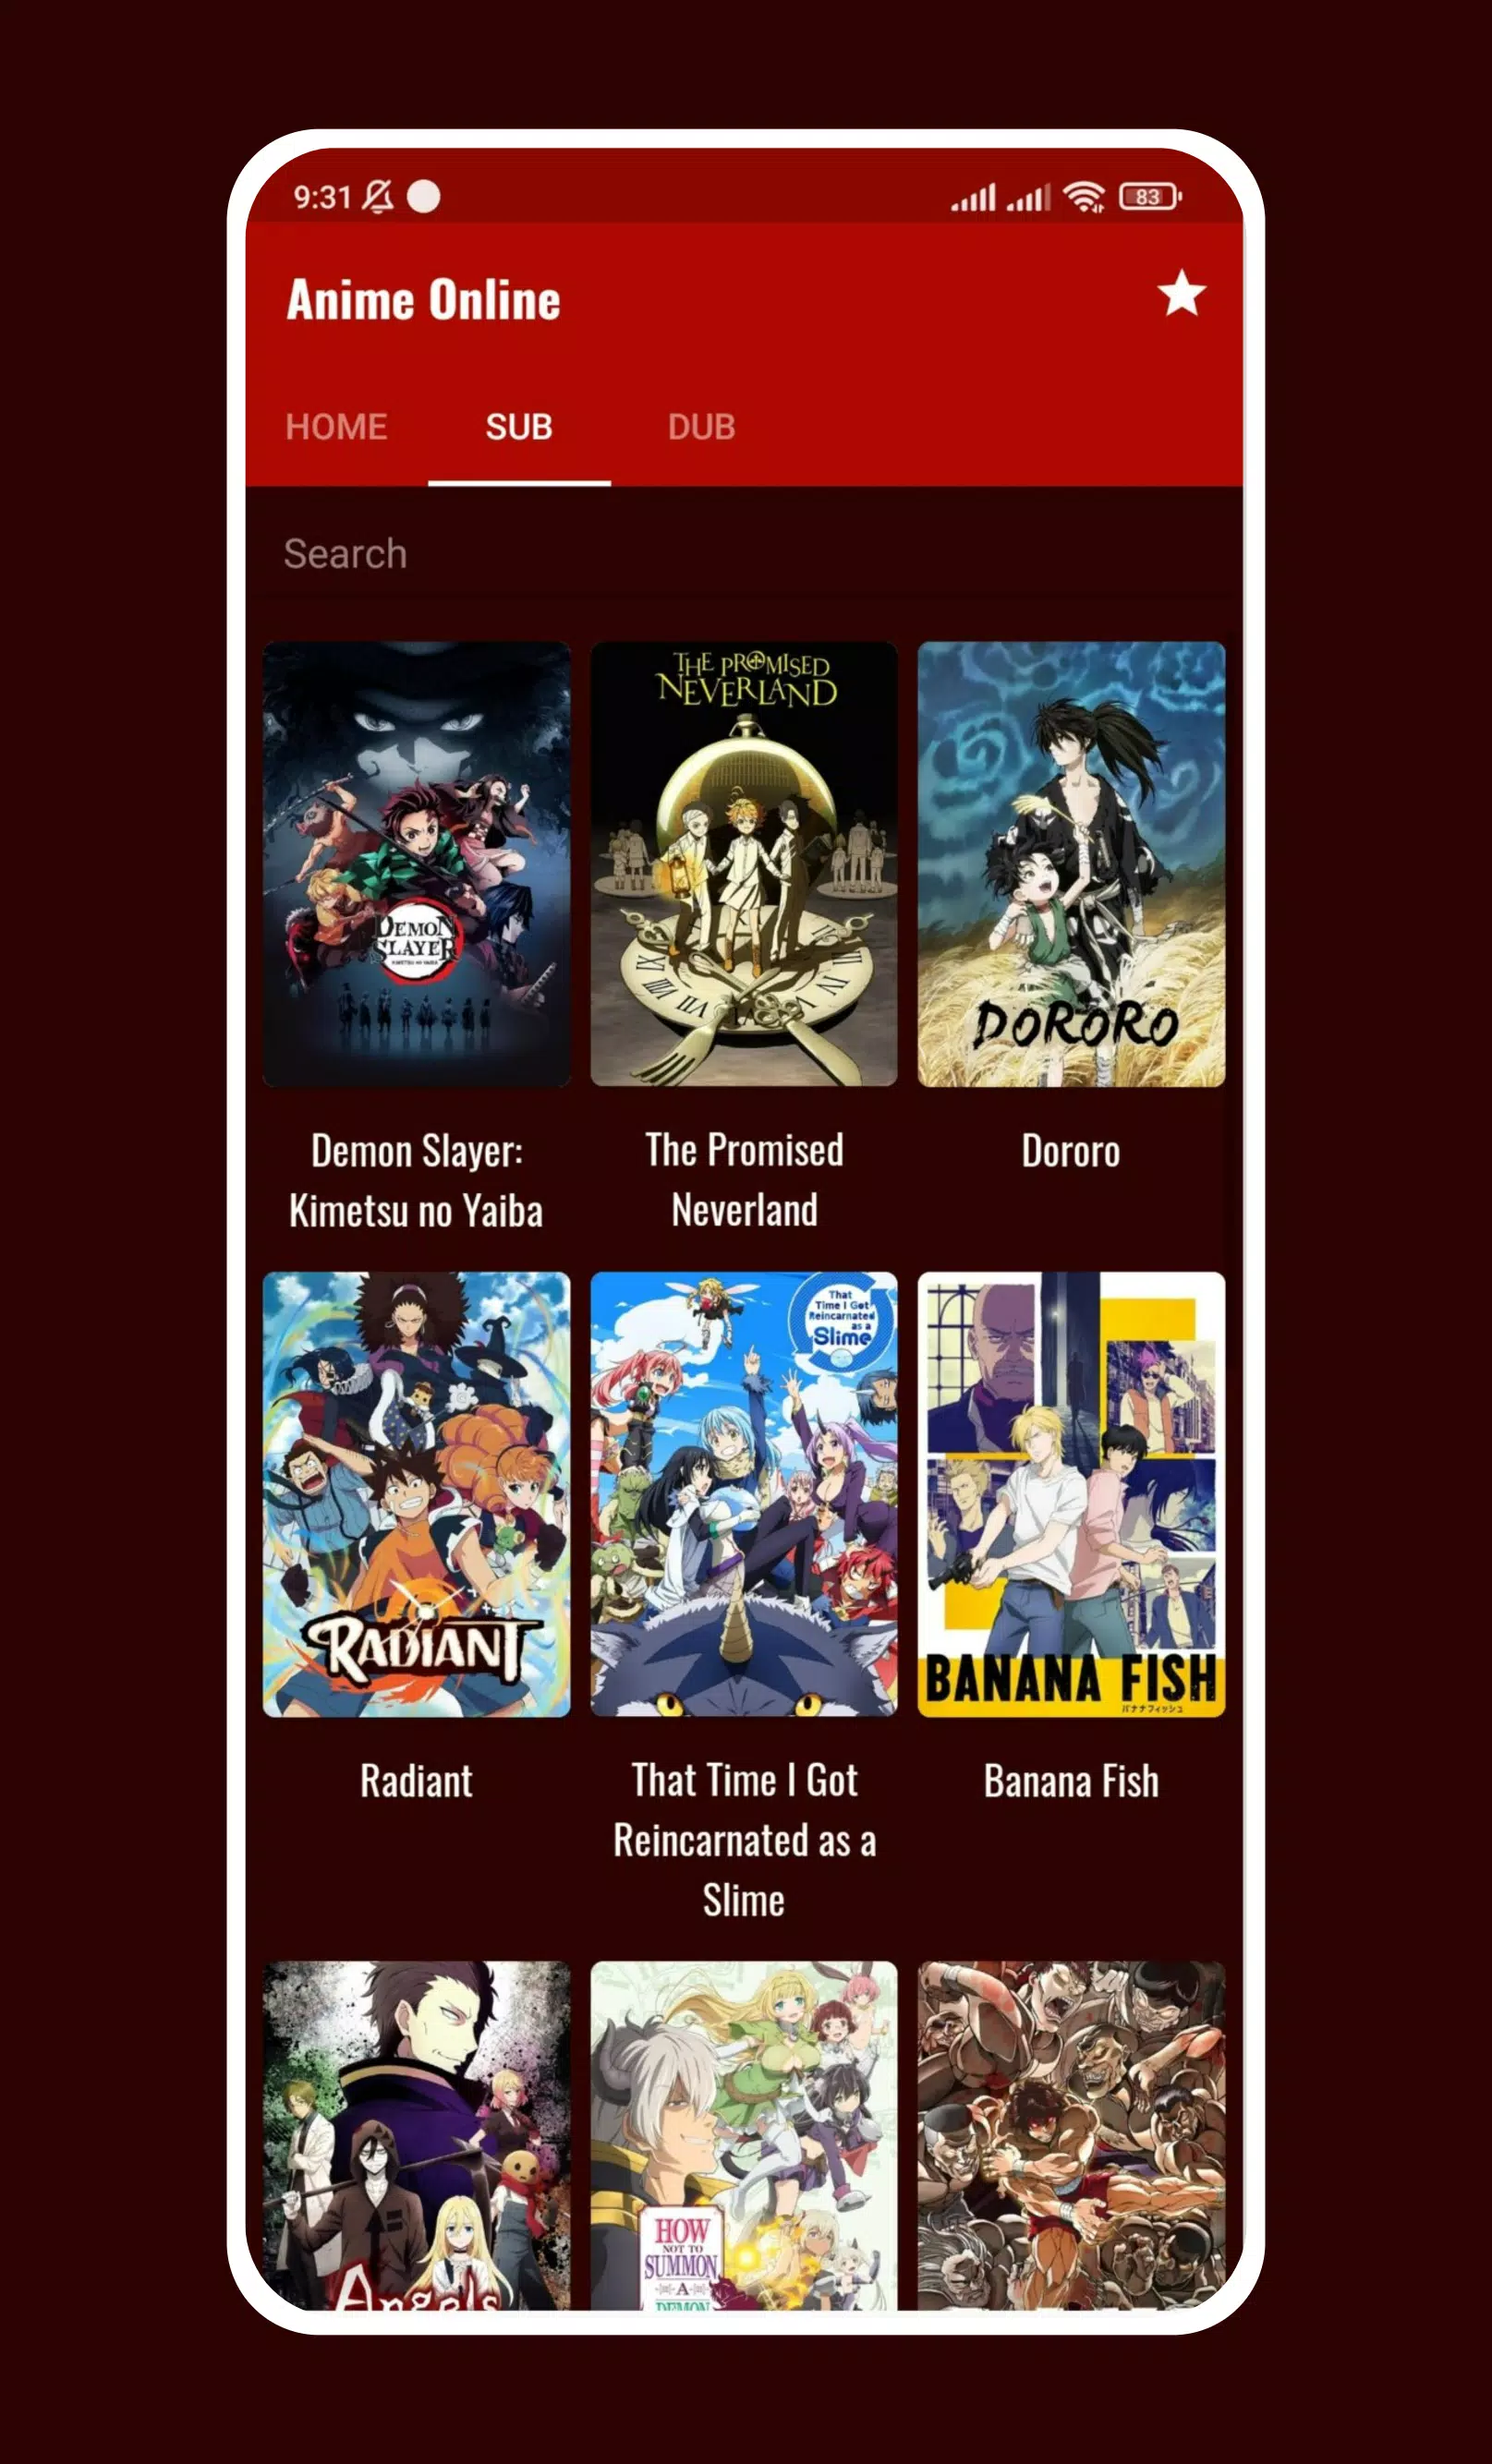 Download Anime TV - Watch Anime HD MOD APK v1.2 for Android